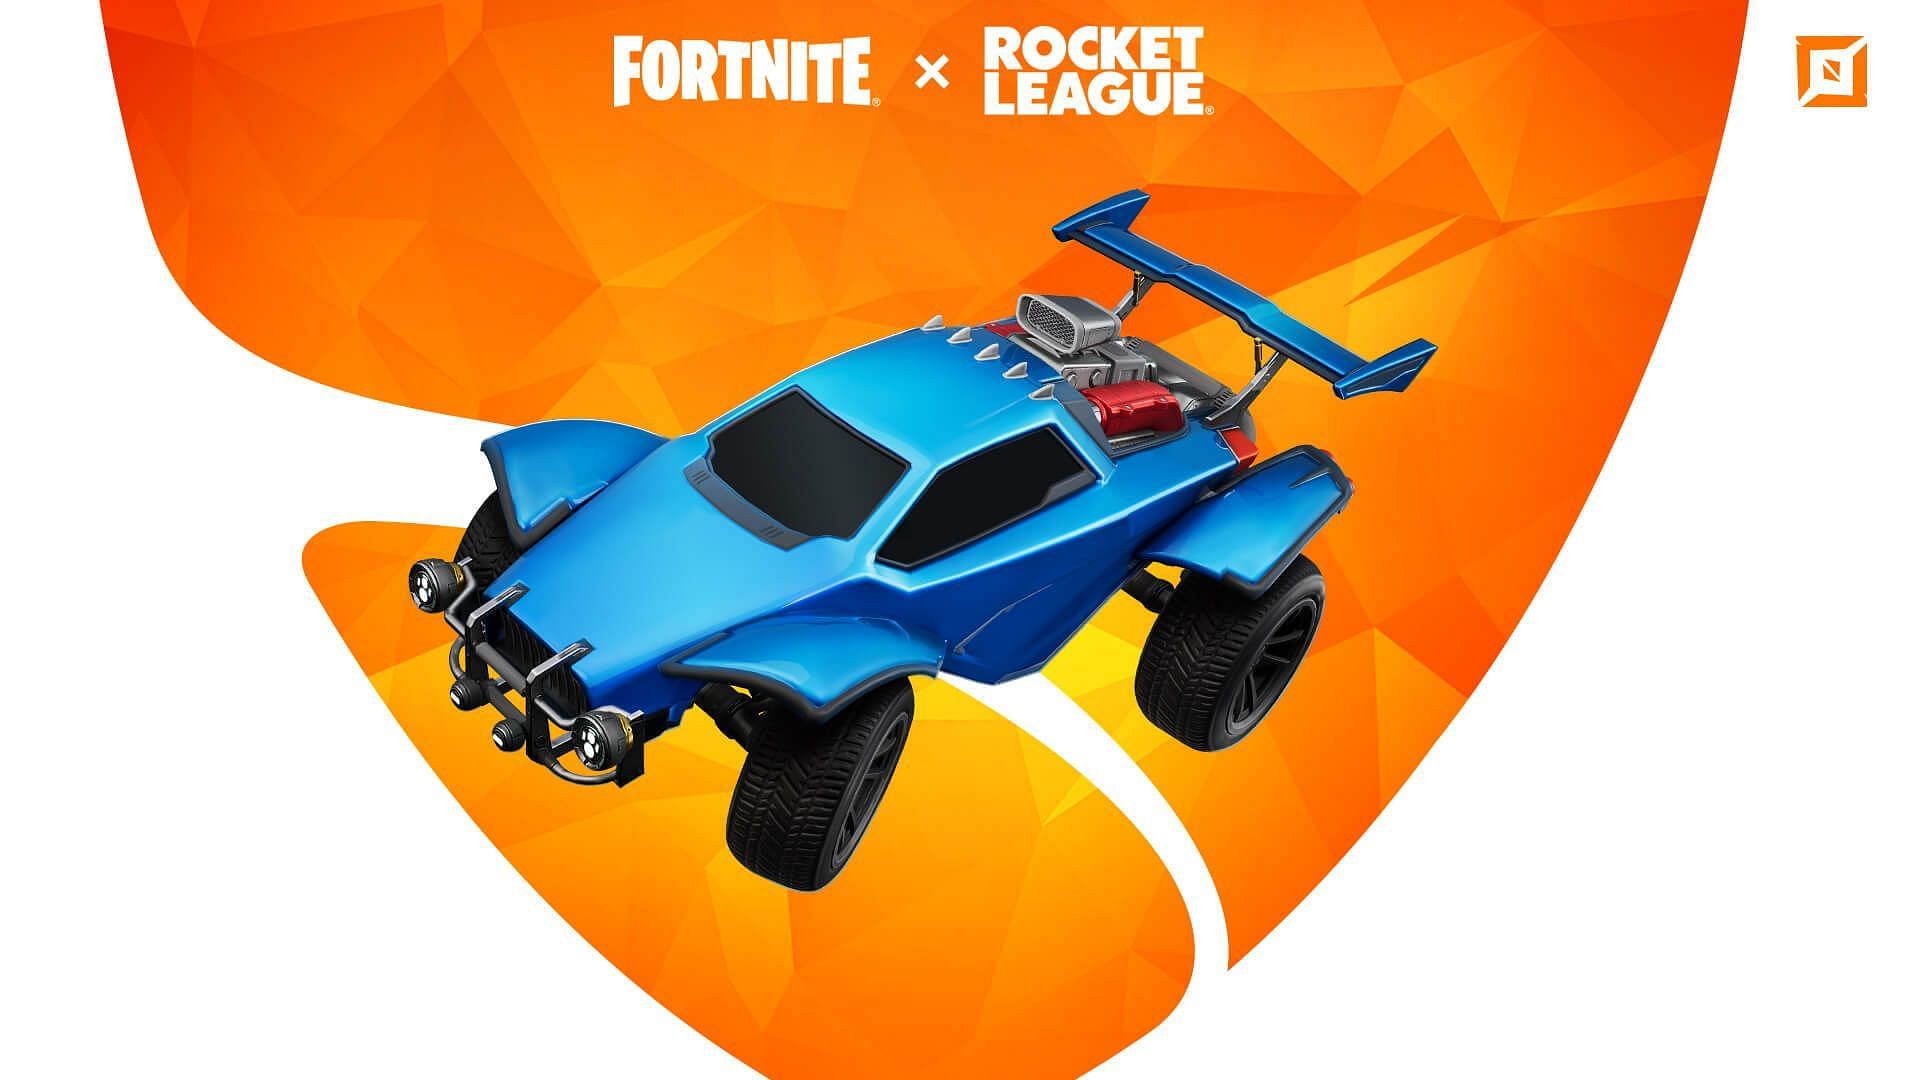 Fortnite Octane rewards are now available in the popular battle royale game (Image via Epic Games)